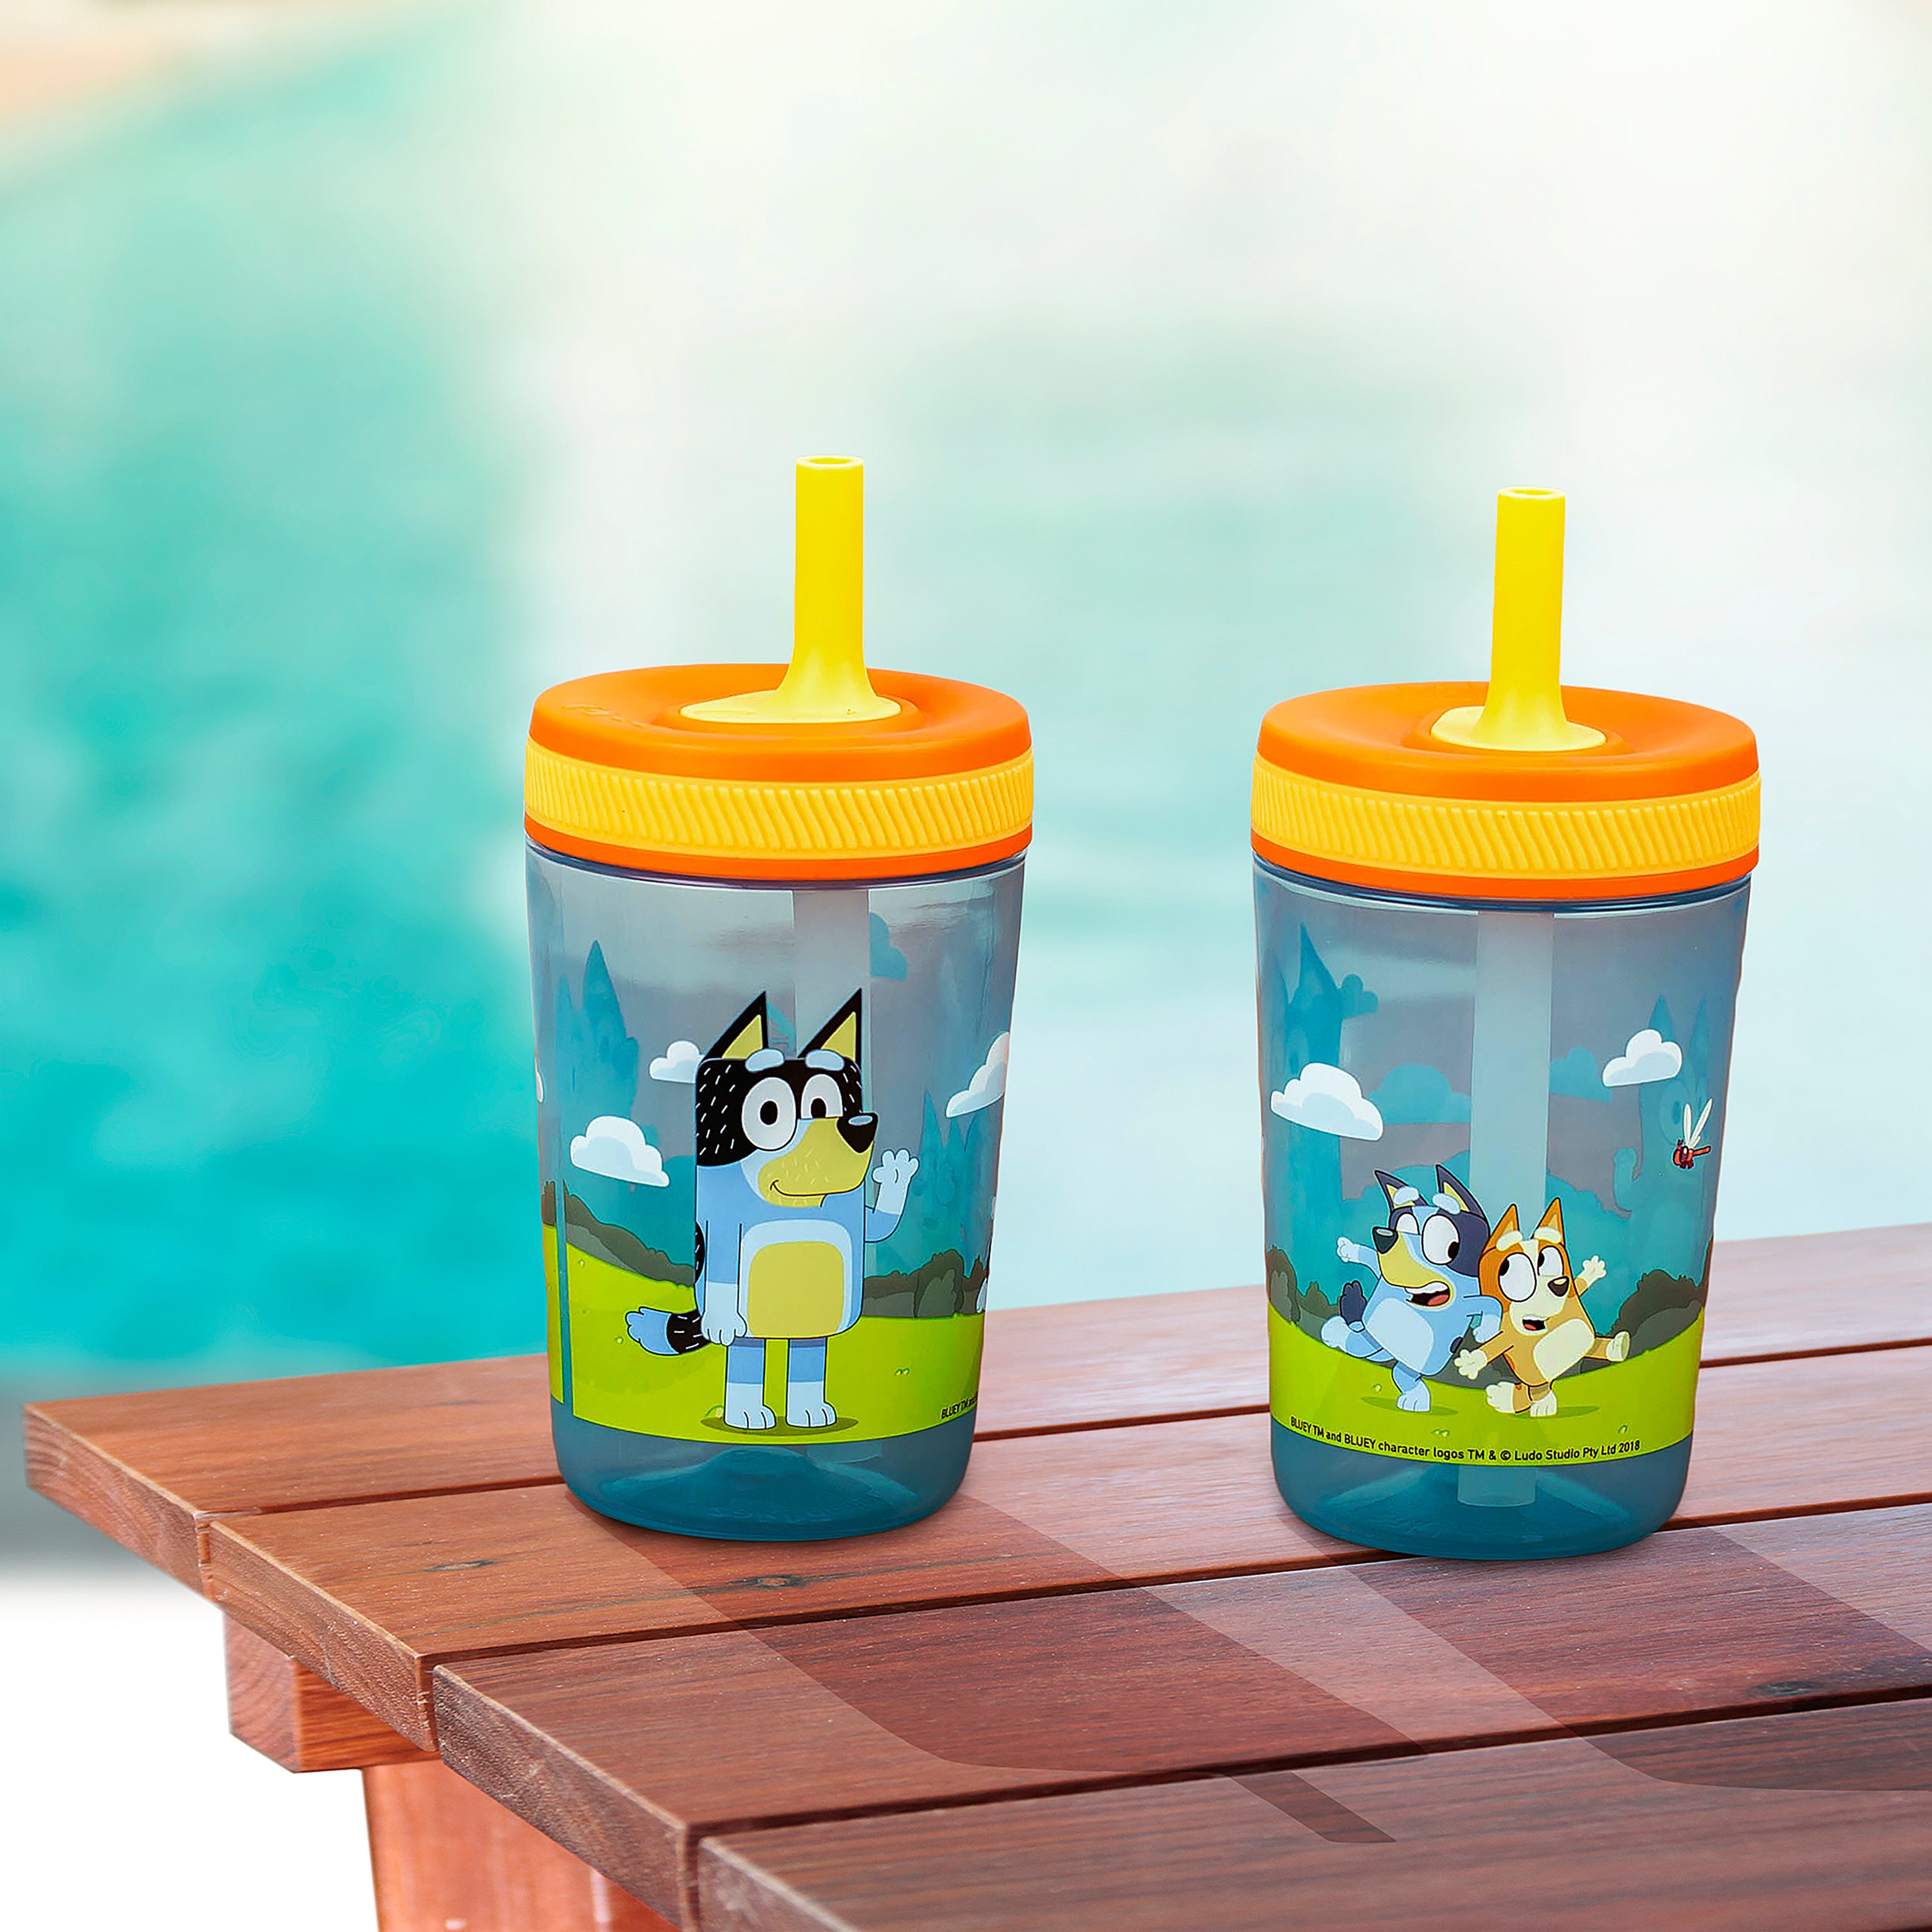 Zak Designs Bluey Kelso Toddler Cups for Travel or at Home, 12oz Vacuum Insulated Stainless Steel Sippy Cup with Leak-Proof Design Is Perfect for